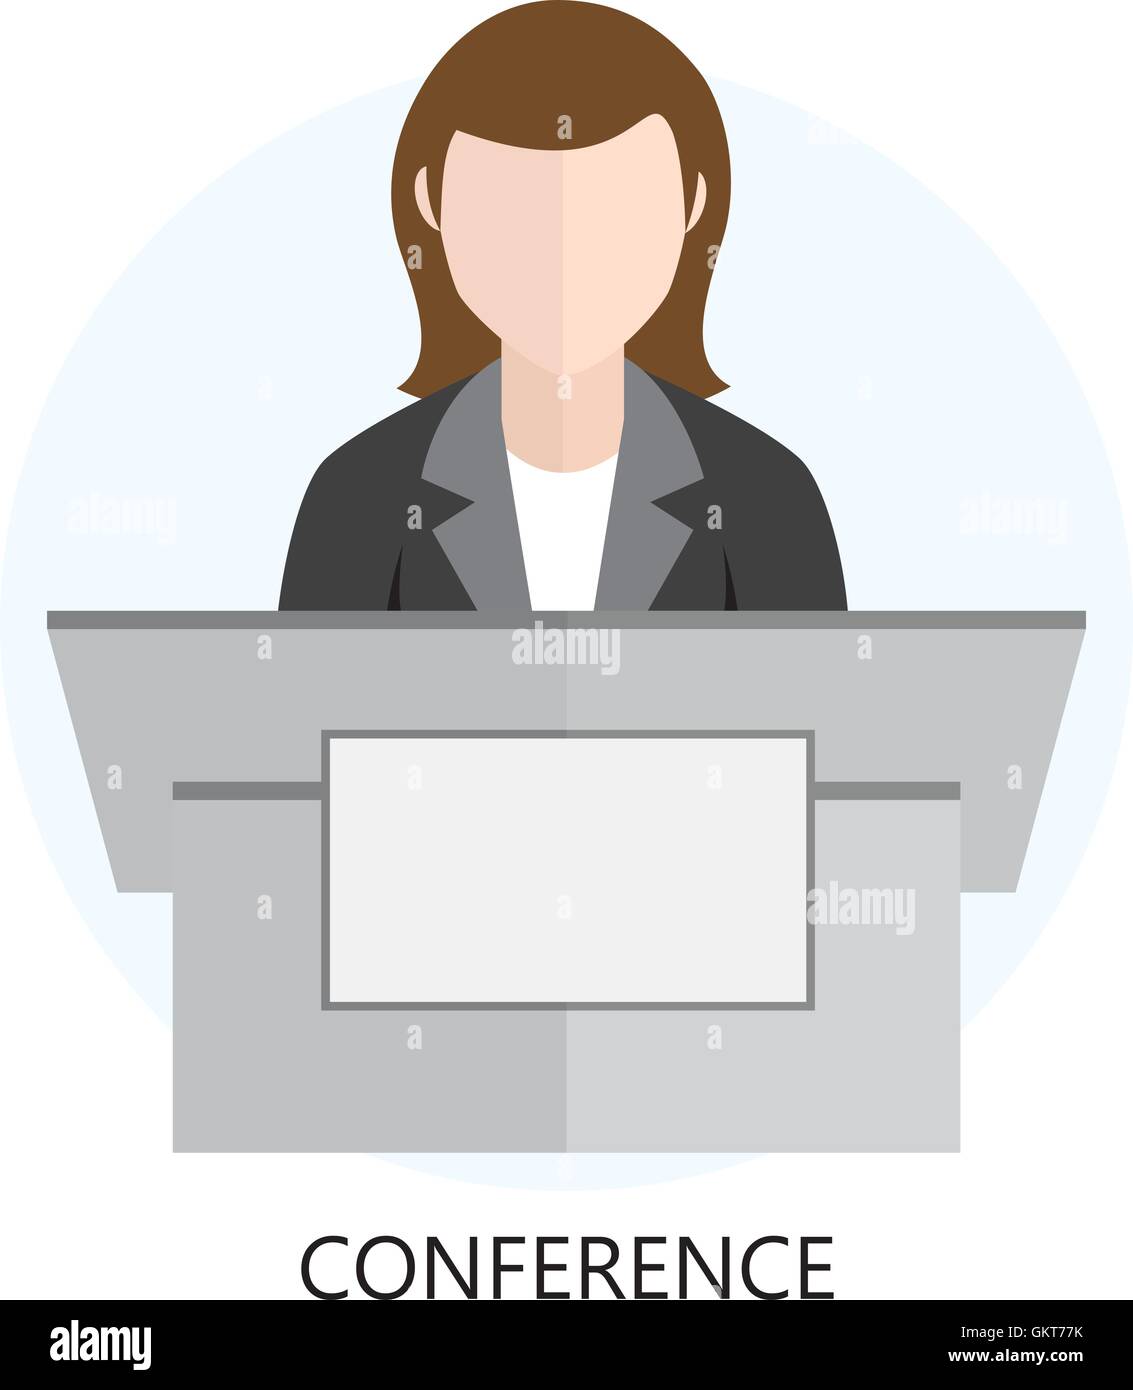 Conference Icon Flat Design Concept Stock Vector